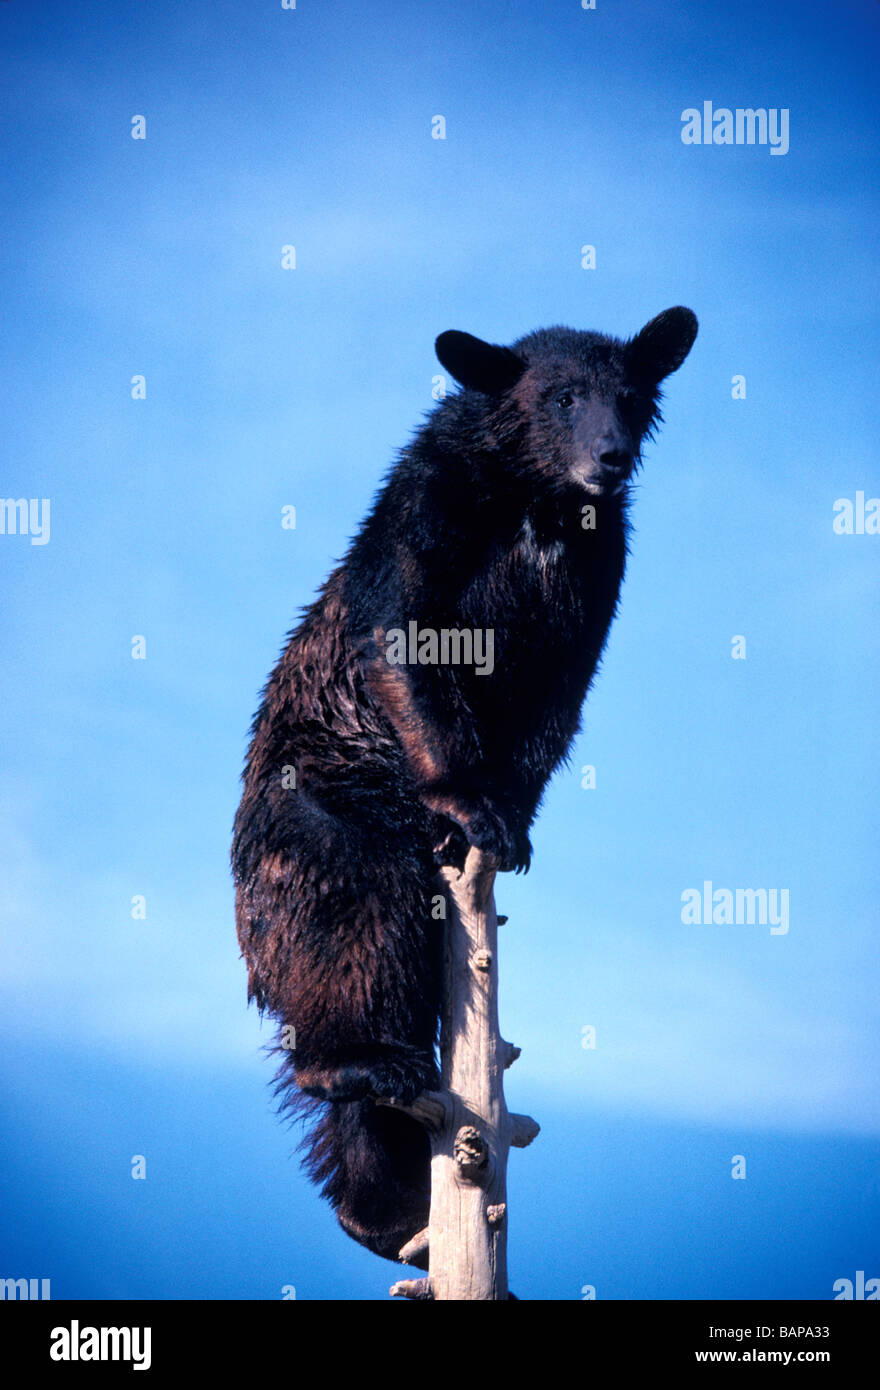 Escape or the view? Wet brown bear appearing worried sits high in a tree hiding from bigger bears or assessing the view Stock Photo